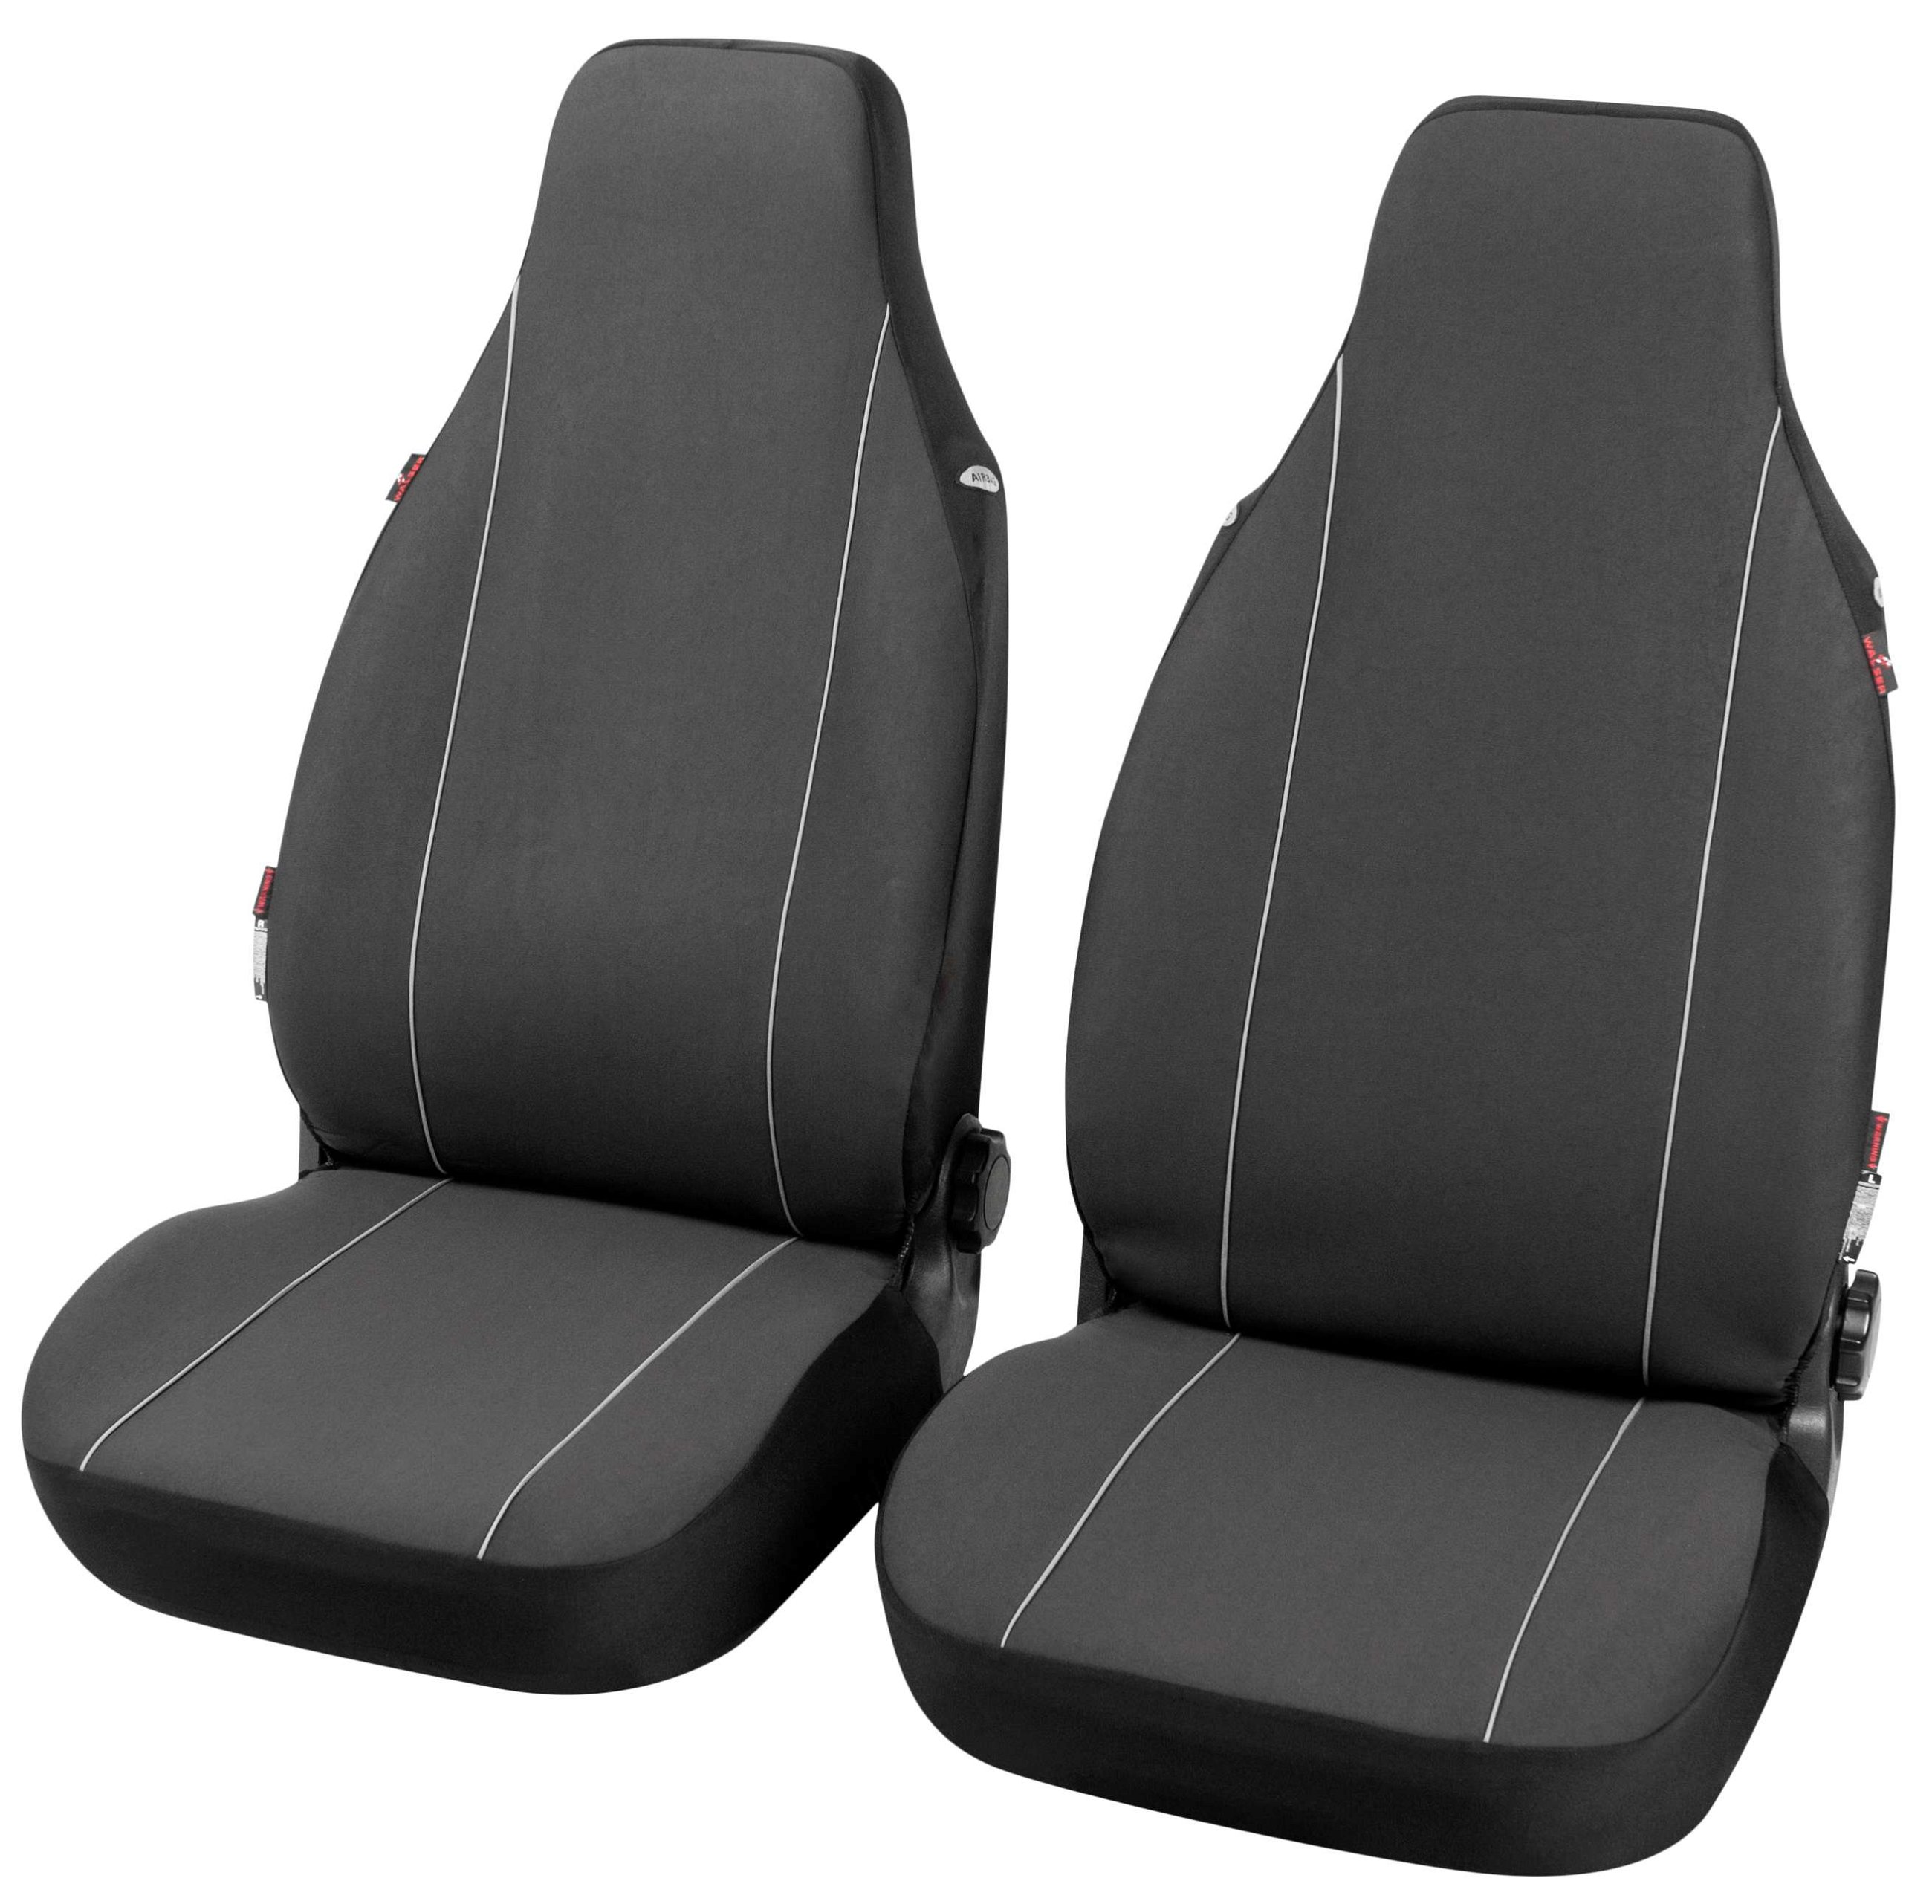 Car Seat cover Modulo Highback for two front seats